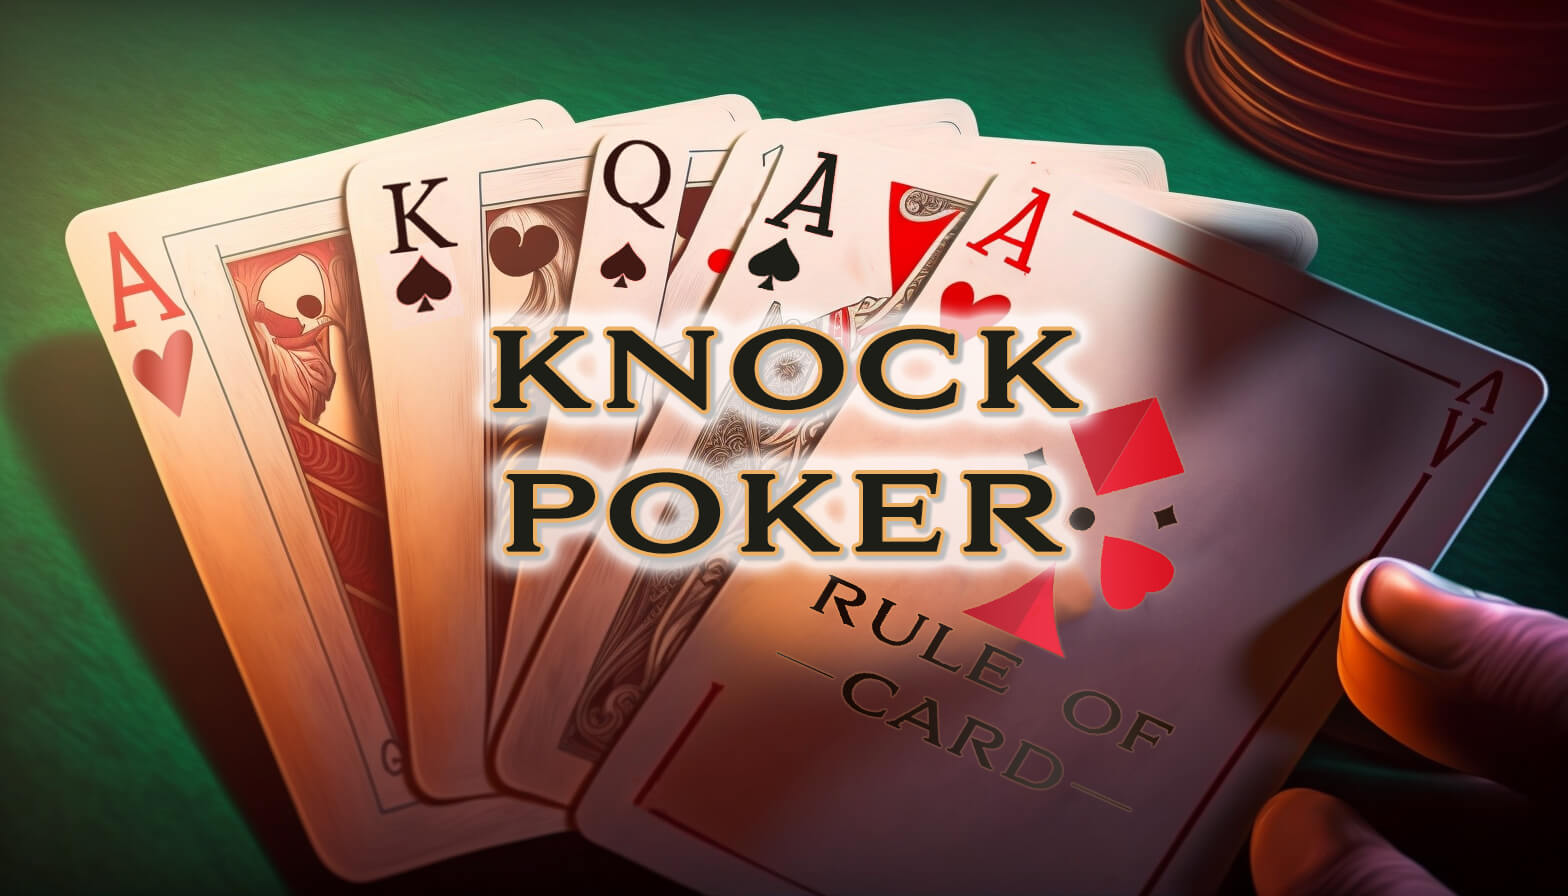 Playing the card game Knock Poker